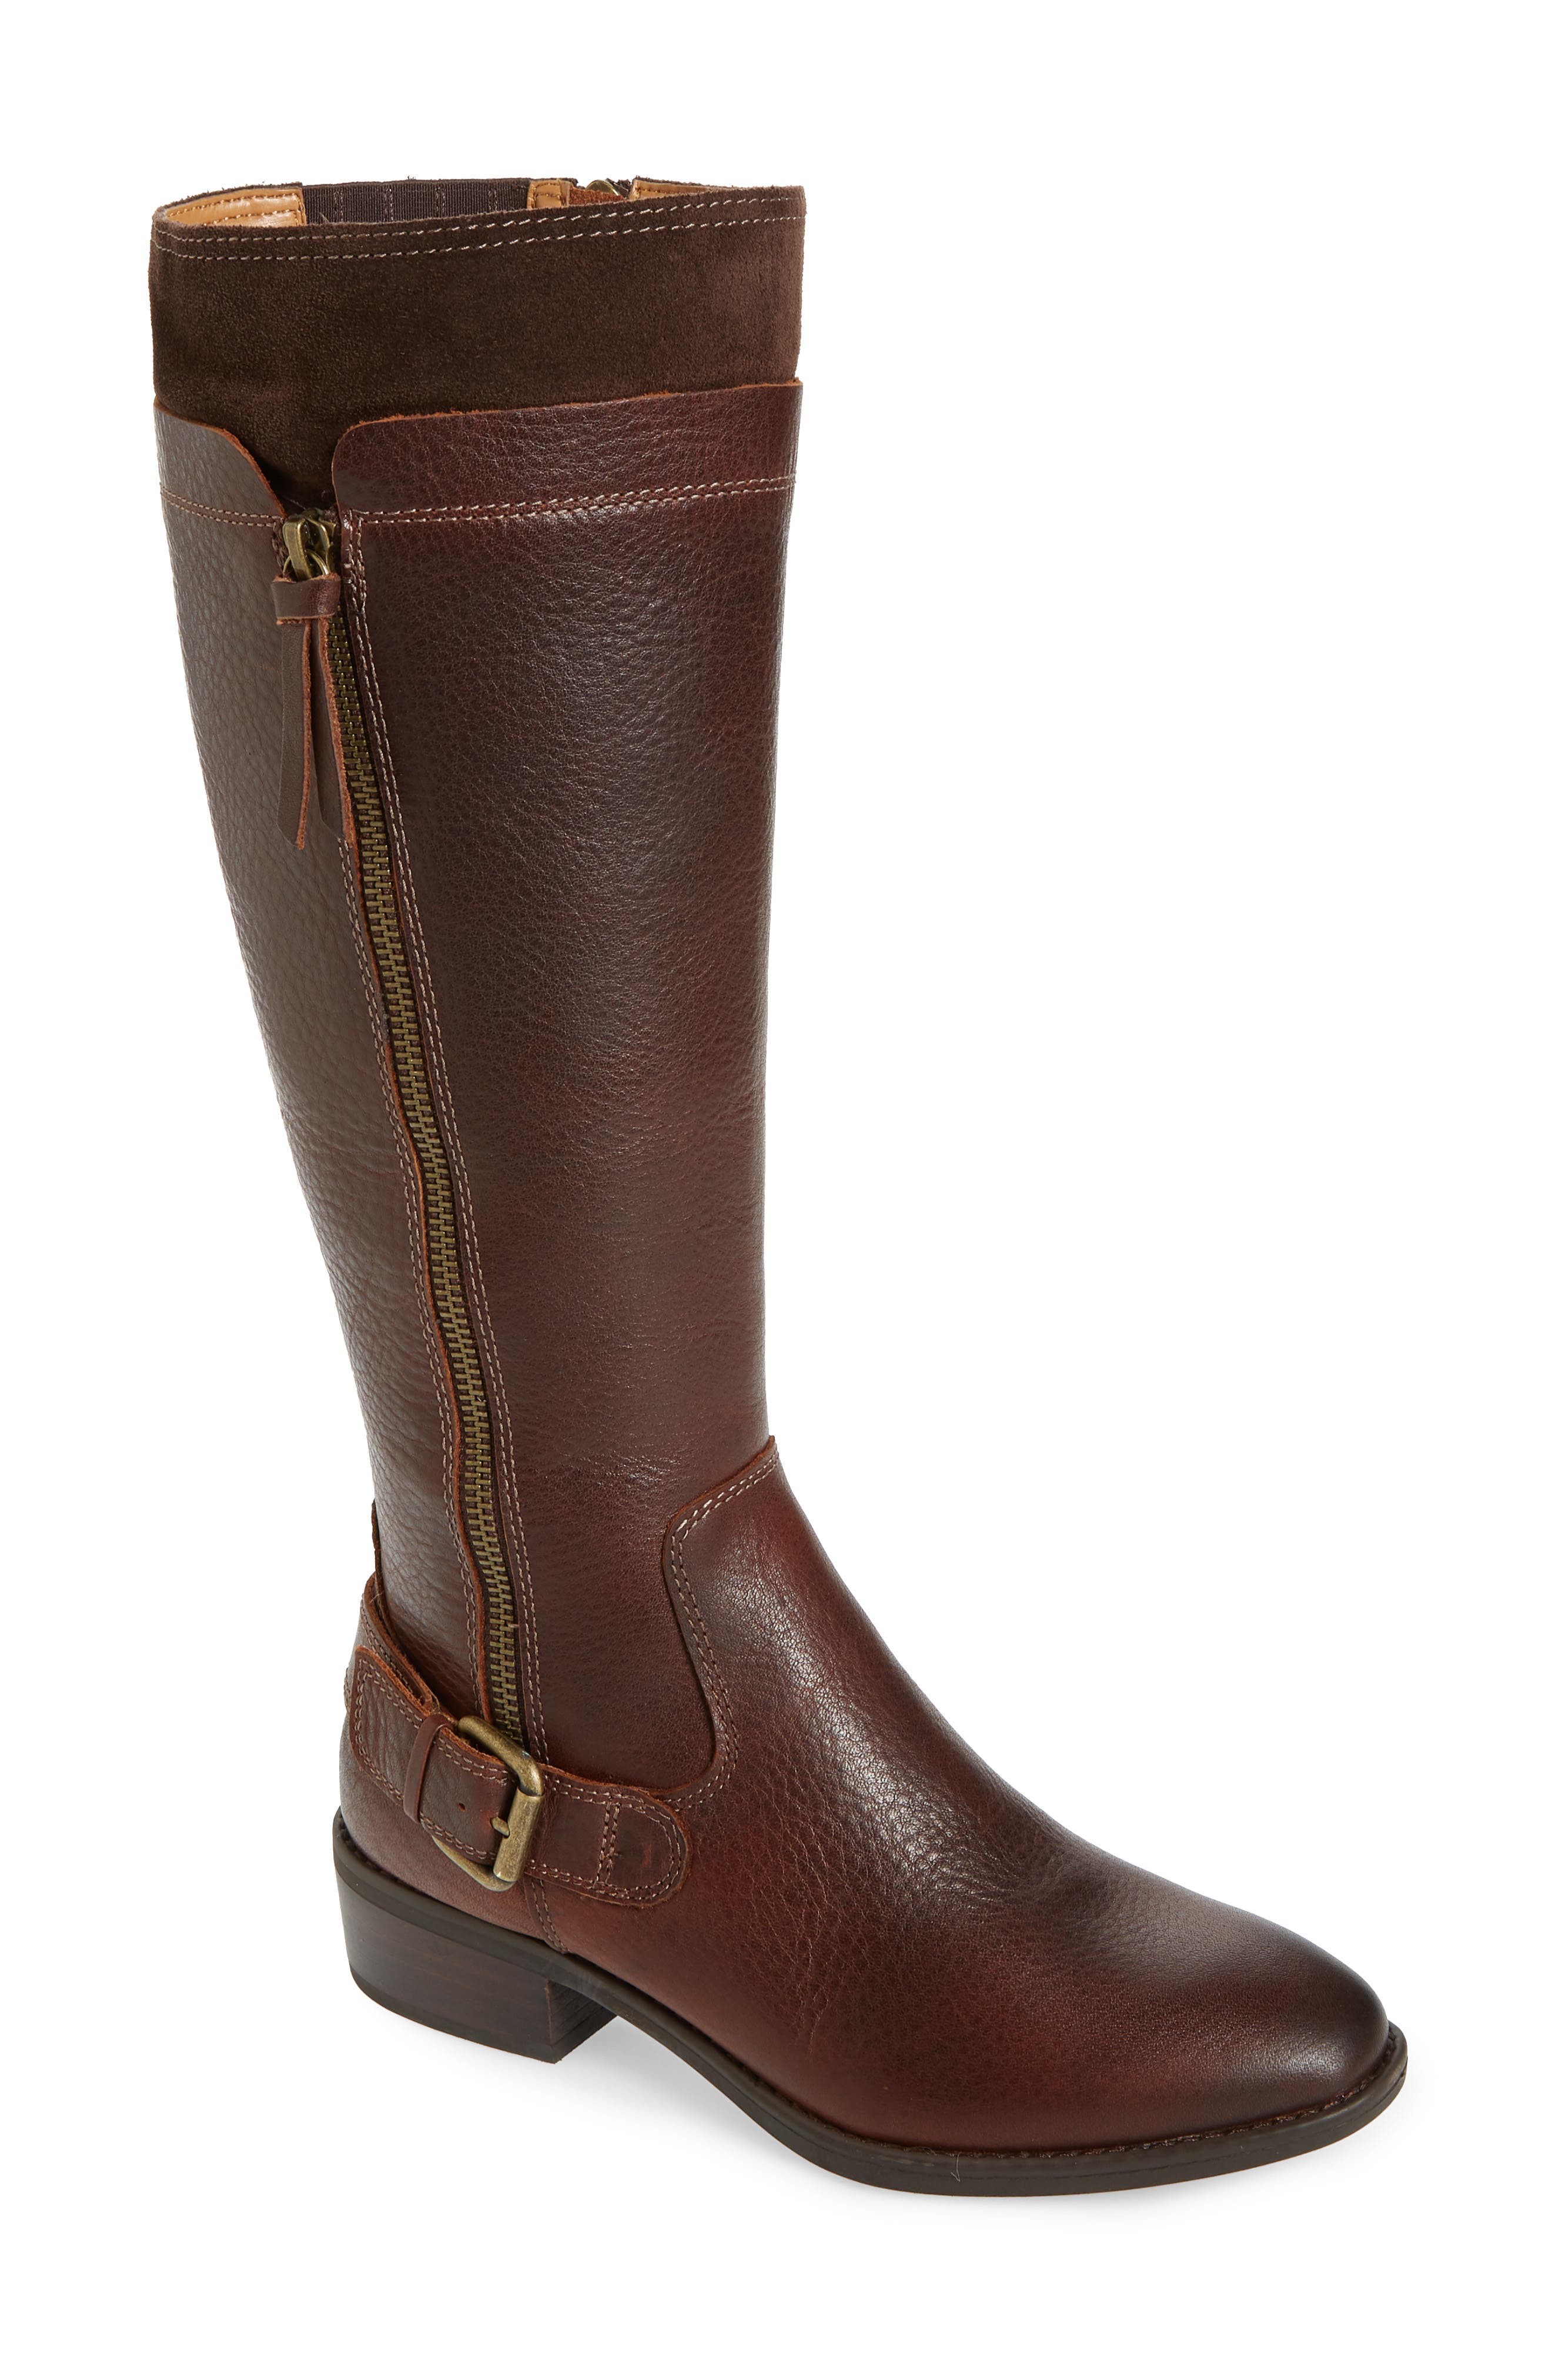 nordstrom womens knee high boots